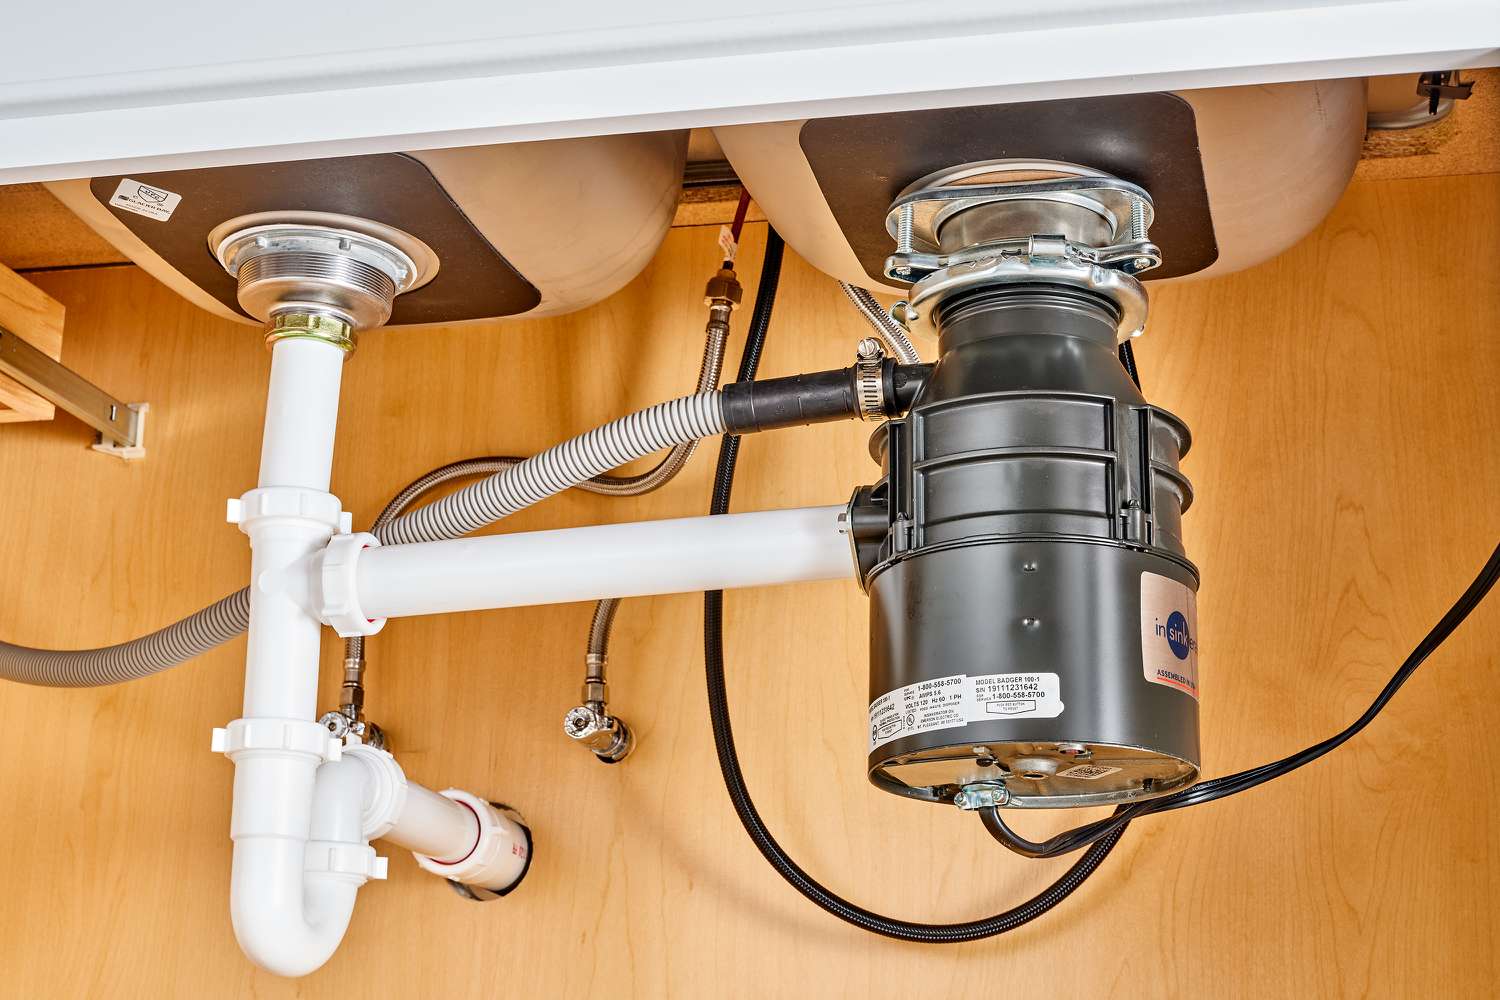 How To Remove A Garbage Disposal